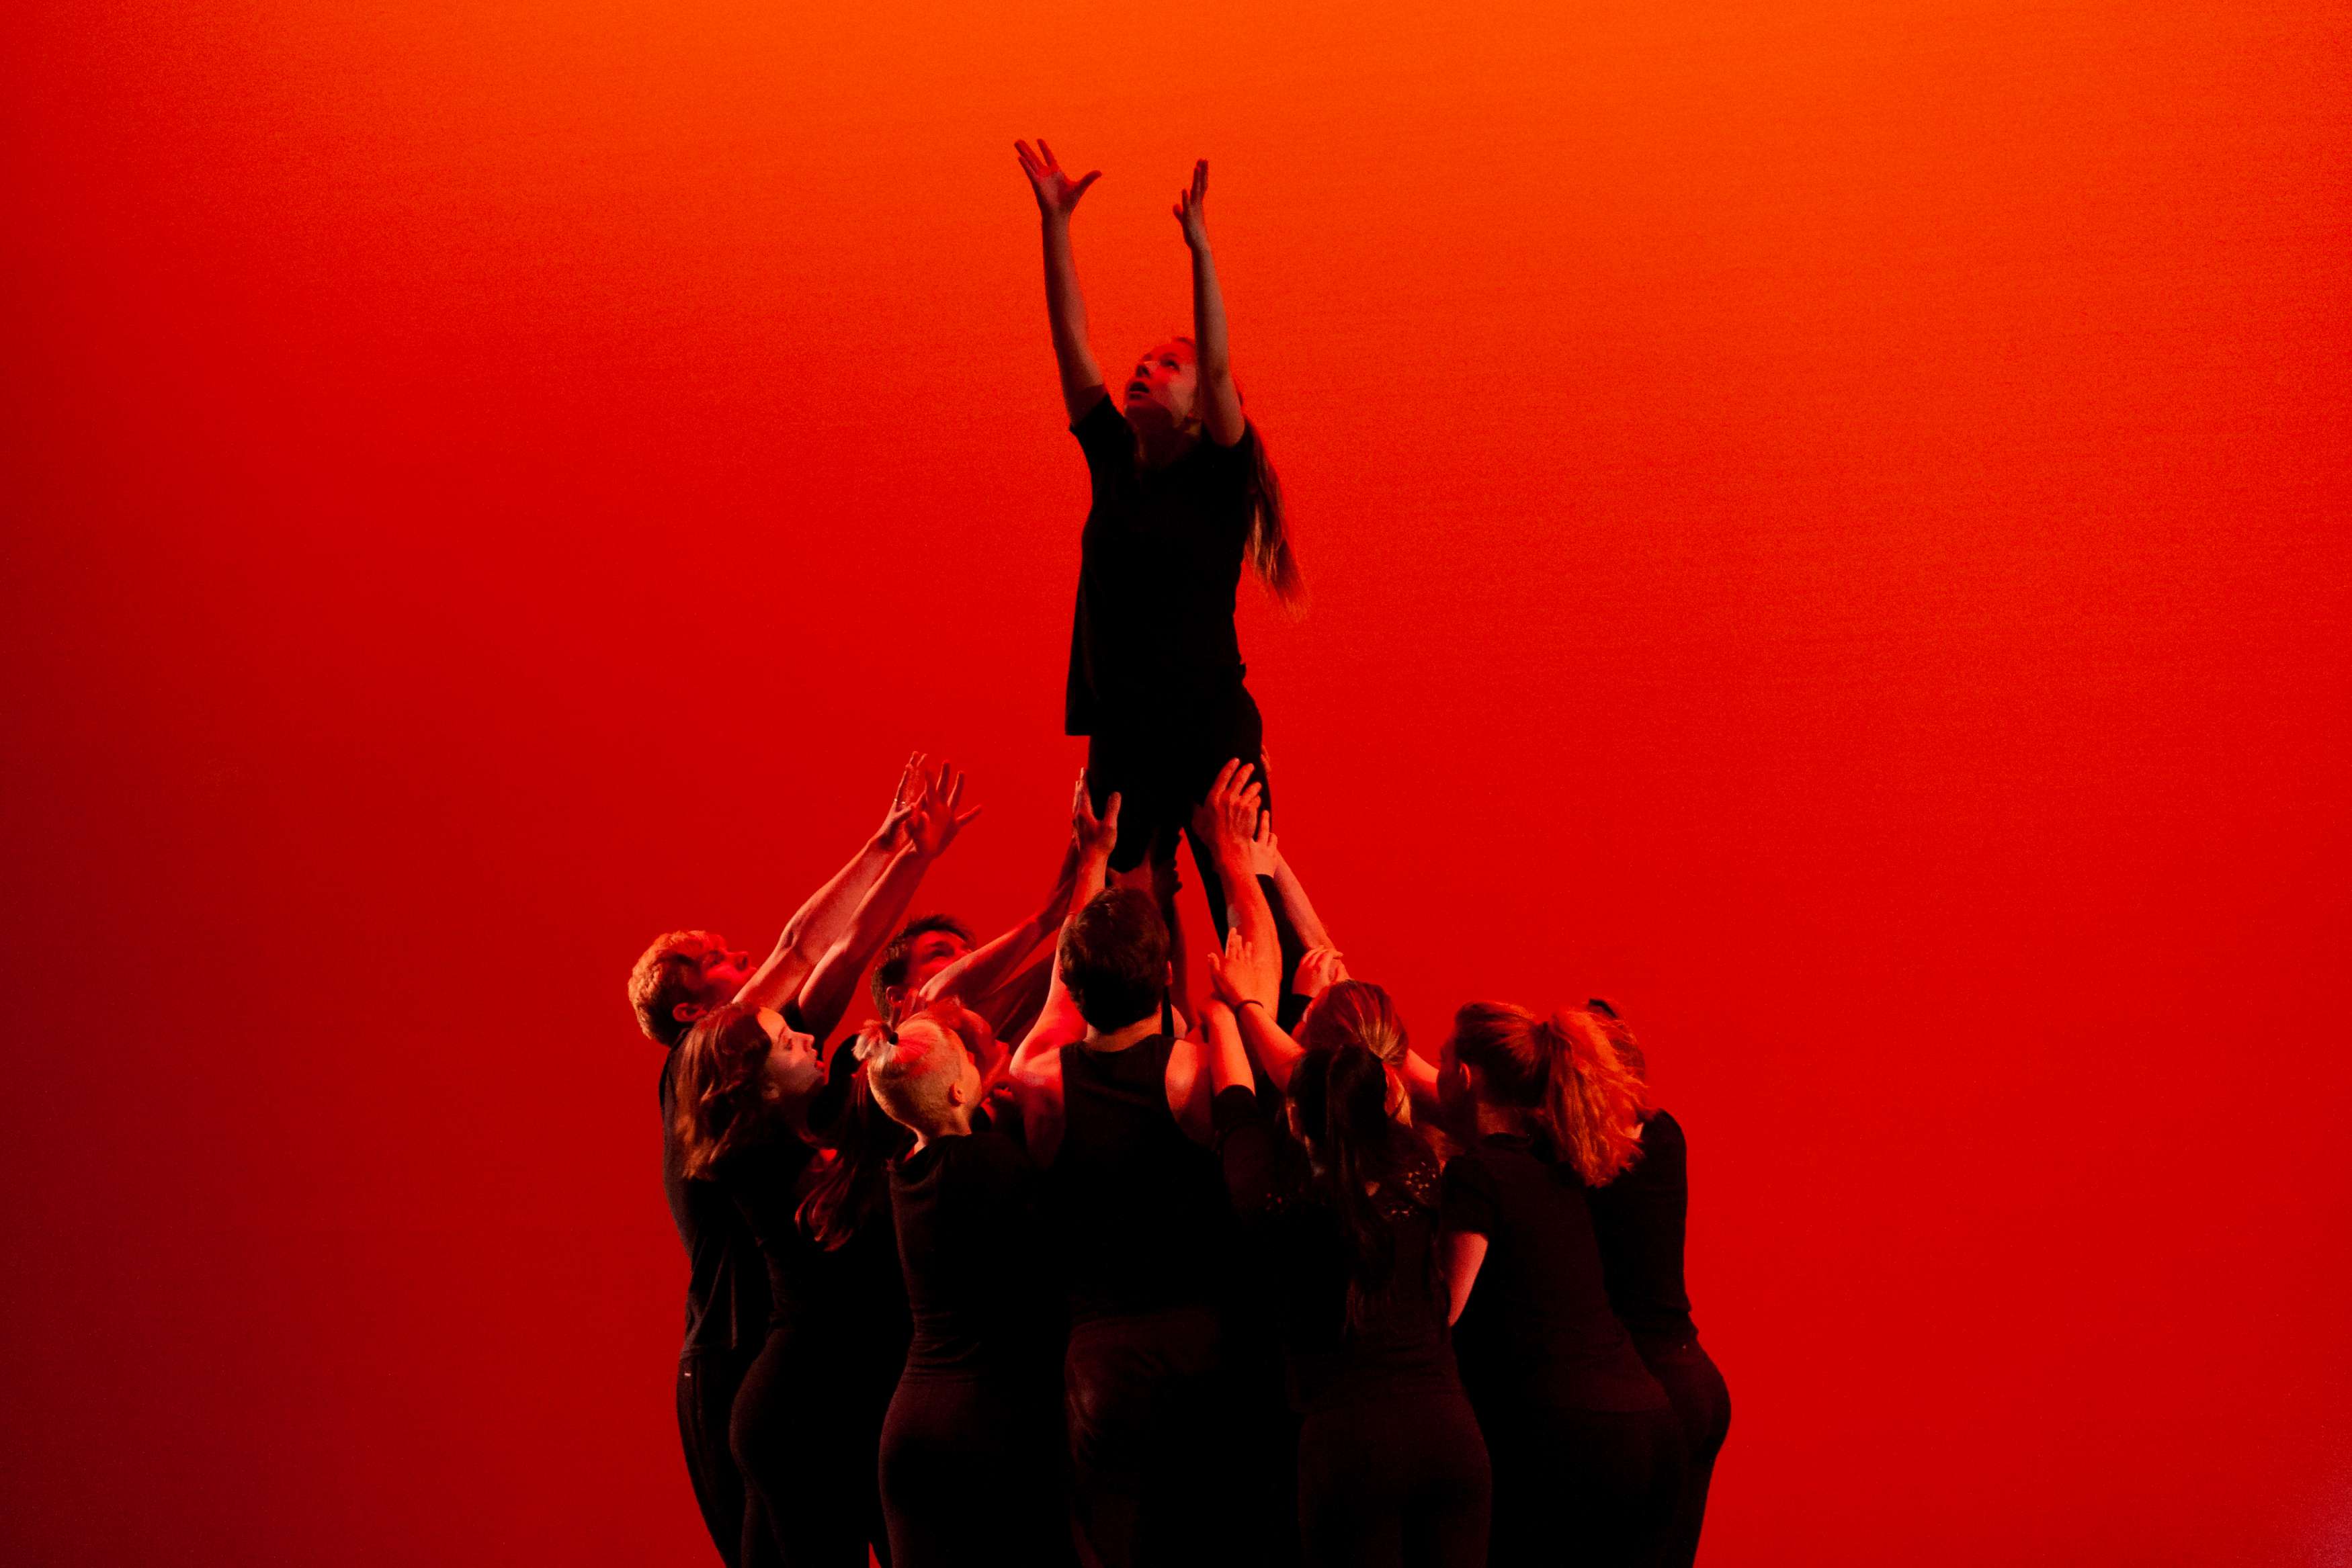 A group of dancers lifts another dancer with her arms raised toward the sky, against a red backdrop